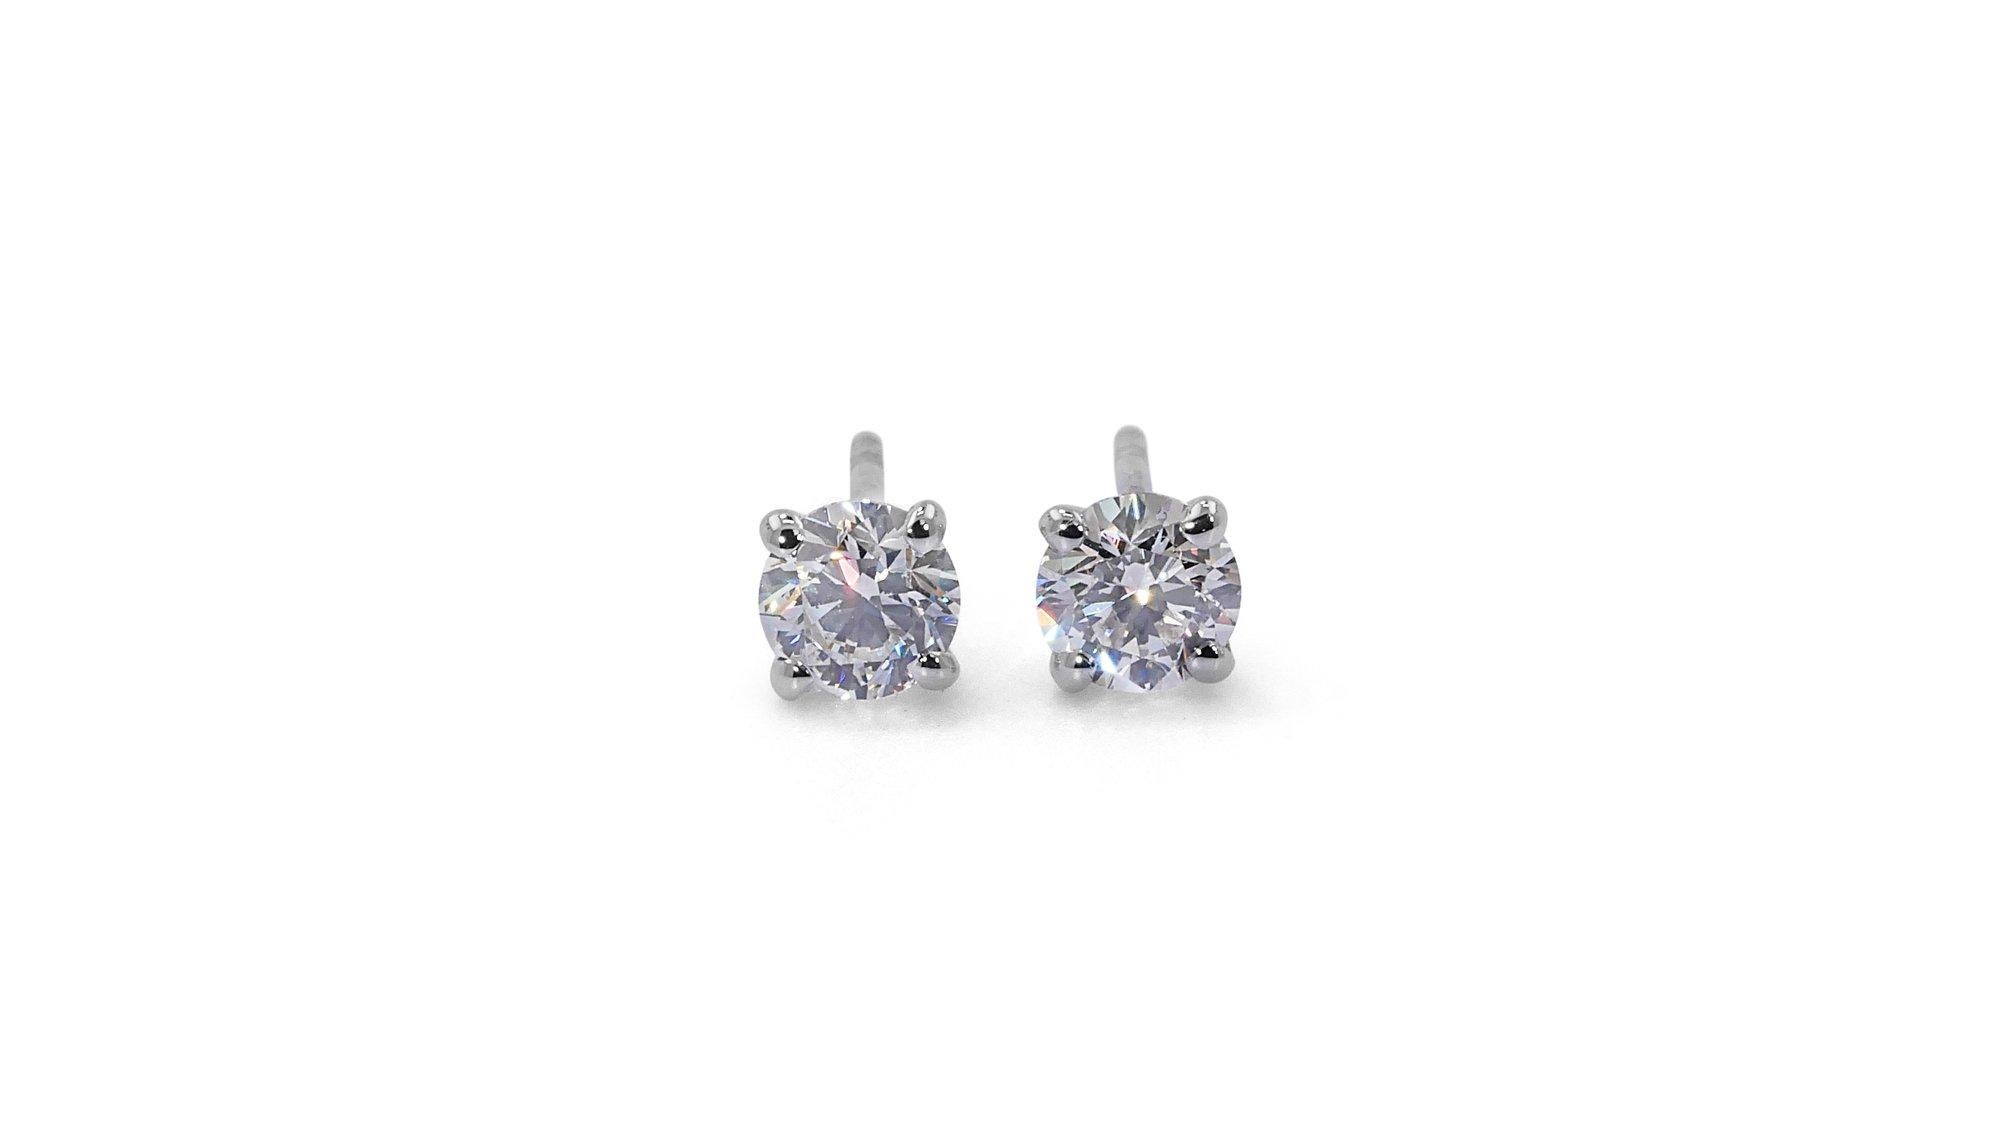 Women's Stunning 18k White Gold Stud Earrings with 0.80 Ct Natural Diamonds GIA Cert For Sale